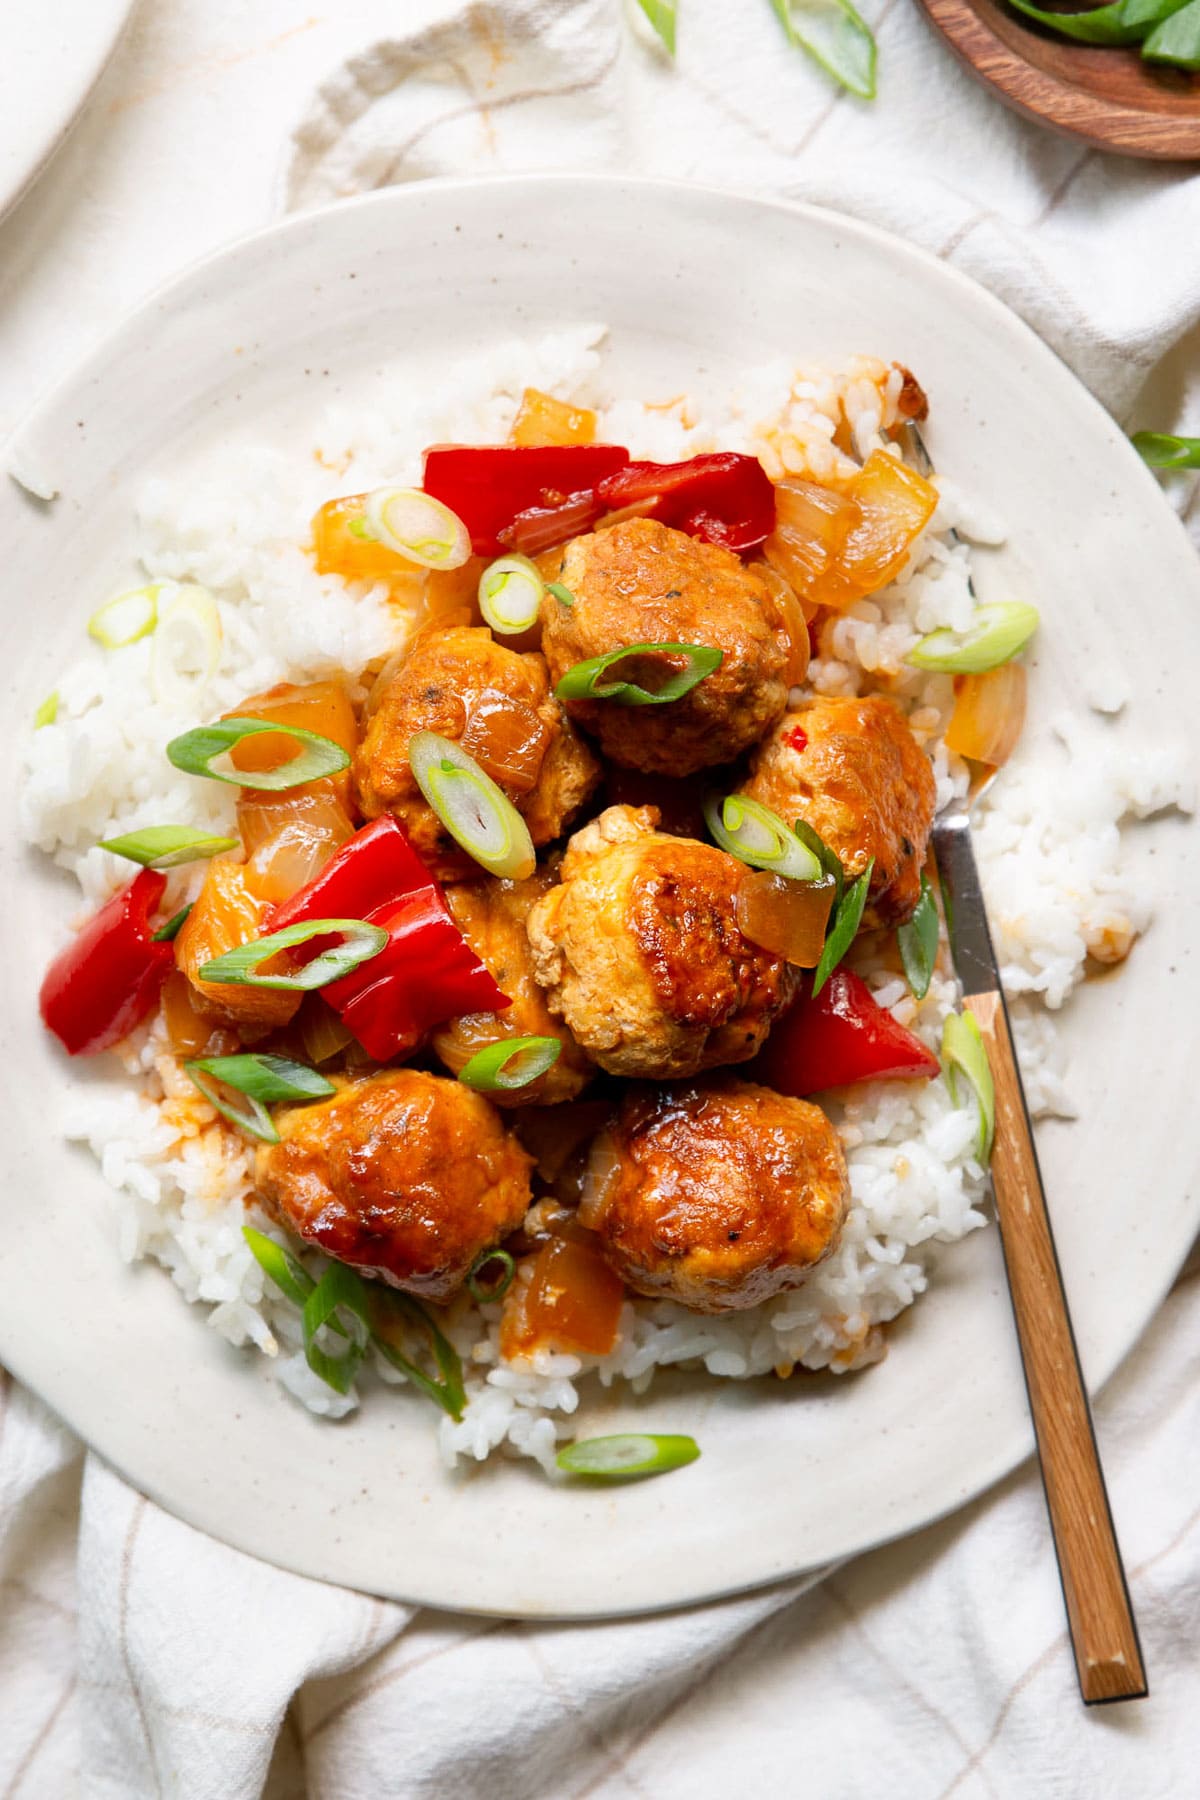 Sweet and sour turkey meatballs with pineapple served on a bed of rice and garnished with green onion.